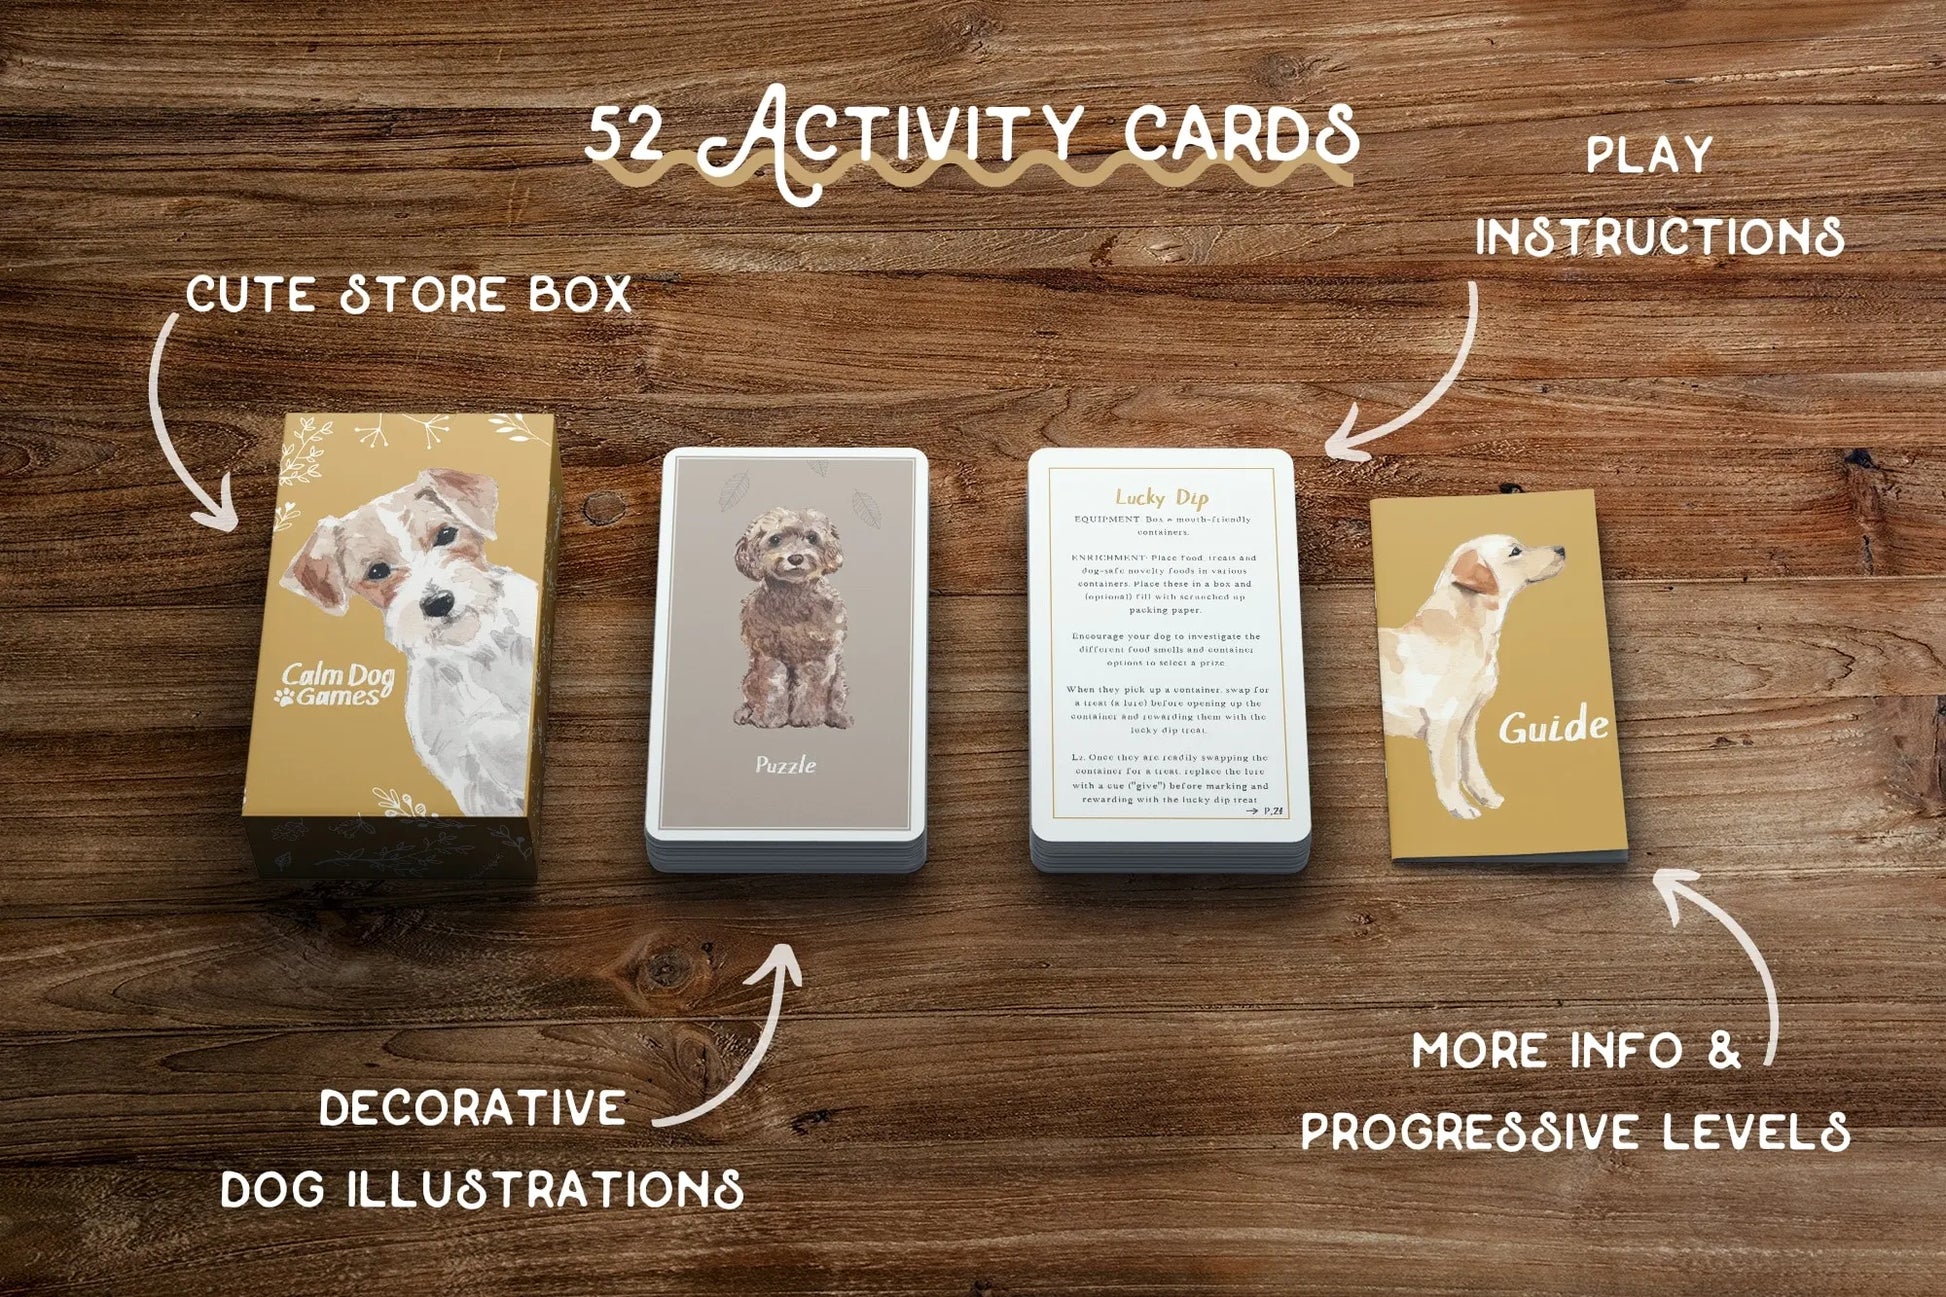 An overview of Your Whole Dog's Calm Dog Games - Brain Games & Enrichment Activity Deck set displayed on a wooden surface, including a storage box, activity cards with dog illustrations, and enrichment activities.